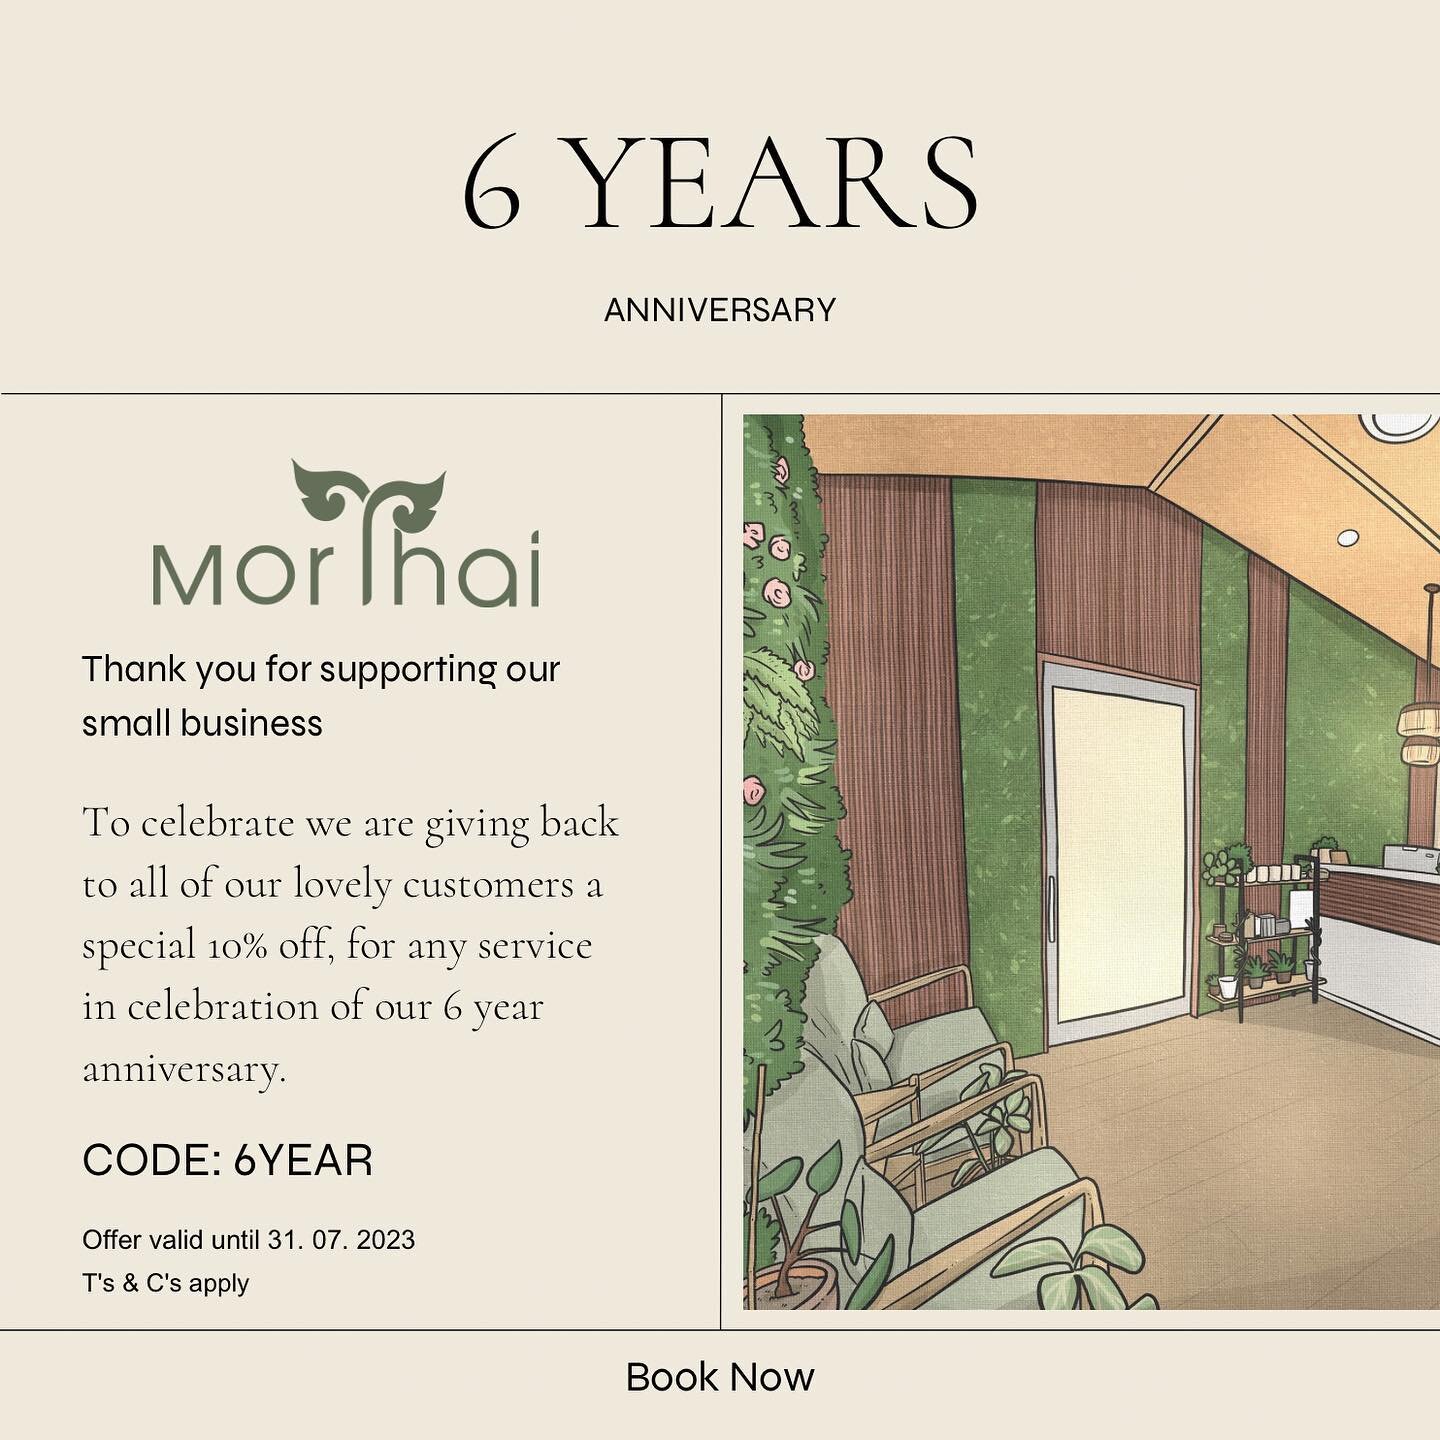 Mor Thai&rsquo;s six year anniversary has arrived! Our team would like to say a big thank you to our lovely customers with a 10% off all services. To claim simply enter the promo code while making your online booking! 

#morthai